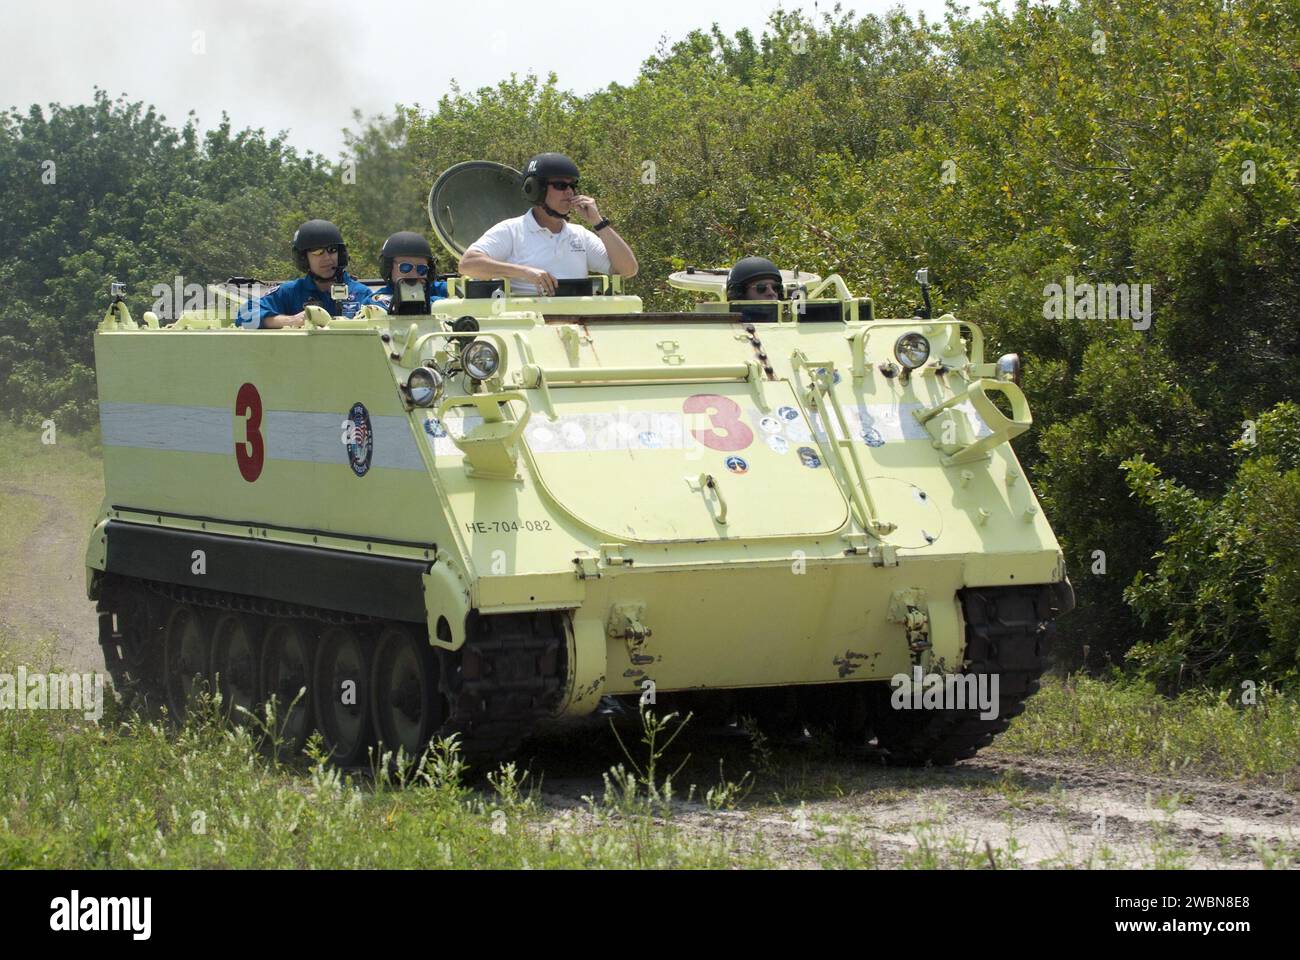 CAPE CANAVERAL, Fla. - Battalion Chief David Seymour provides supervision while space shuttle Endeavour's STS-134 crew members participate in M113 armored personnel carrier training at NASA's Kennedy Space Center in Florida. An M113 is kept at the foot of the launch pad in case an emergency exit from the pad is needed and every shuttle crew is trained on driving the vehicle before launch.      Space shuttle Endeavour's six crew members are at Kennedy for the launch countdown dress rehearsal called the Terminal Countdown Demonstration Test (TCDT) and related training. Targeted to launch April 1 Stock Photo